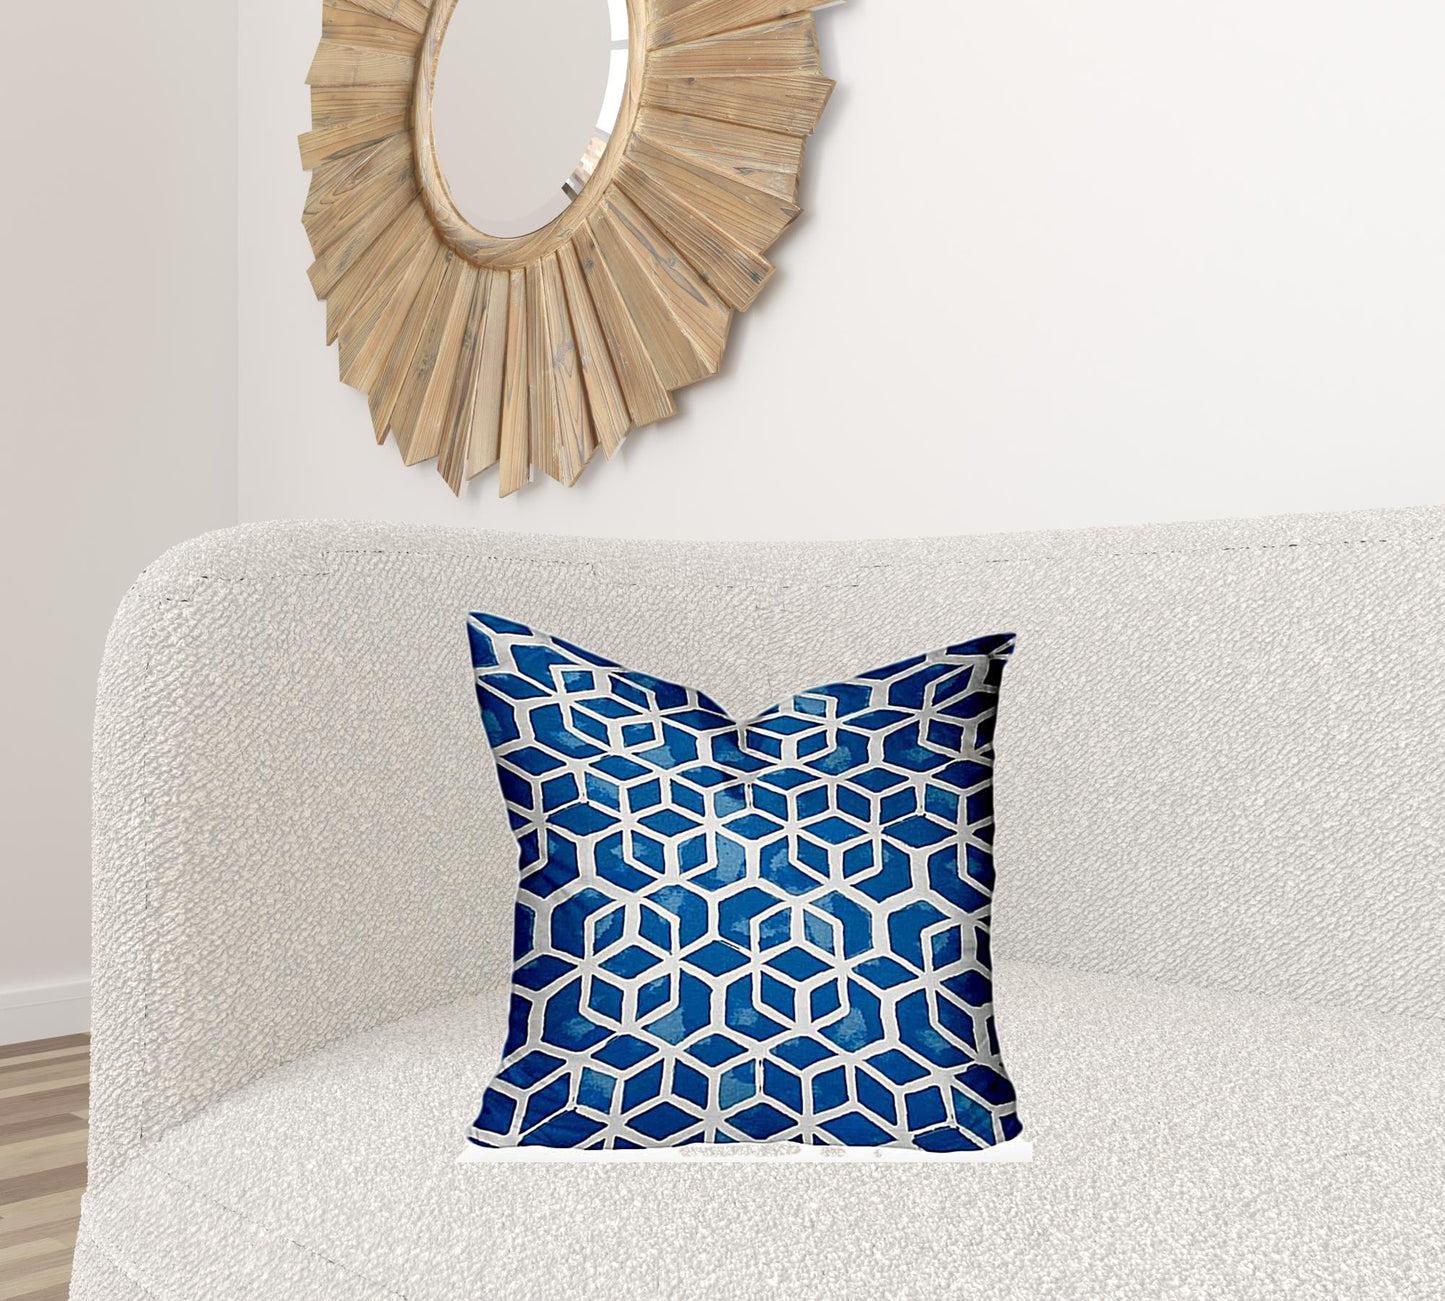 20" X 20" Blue And White Zippered Geometric Throw Indoor Outdoor Pillow